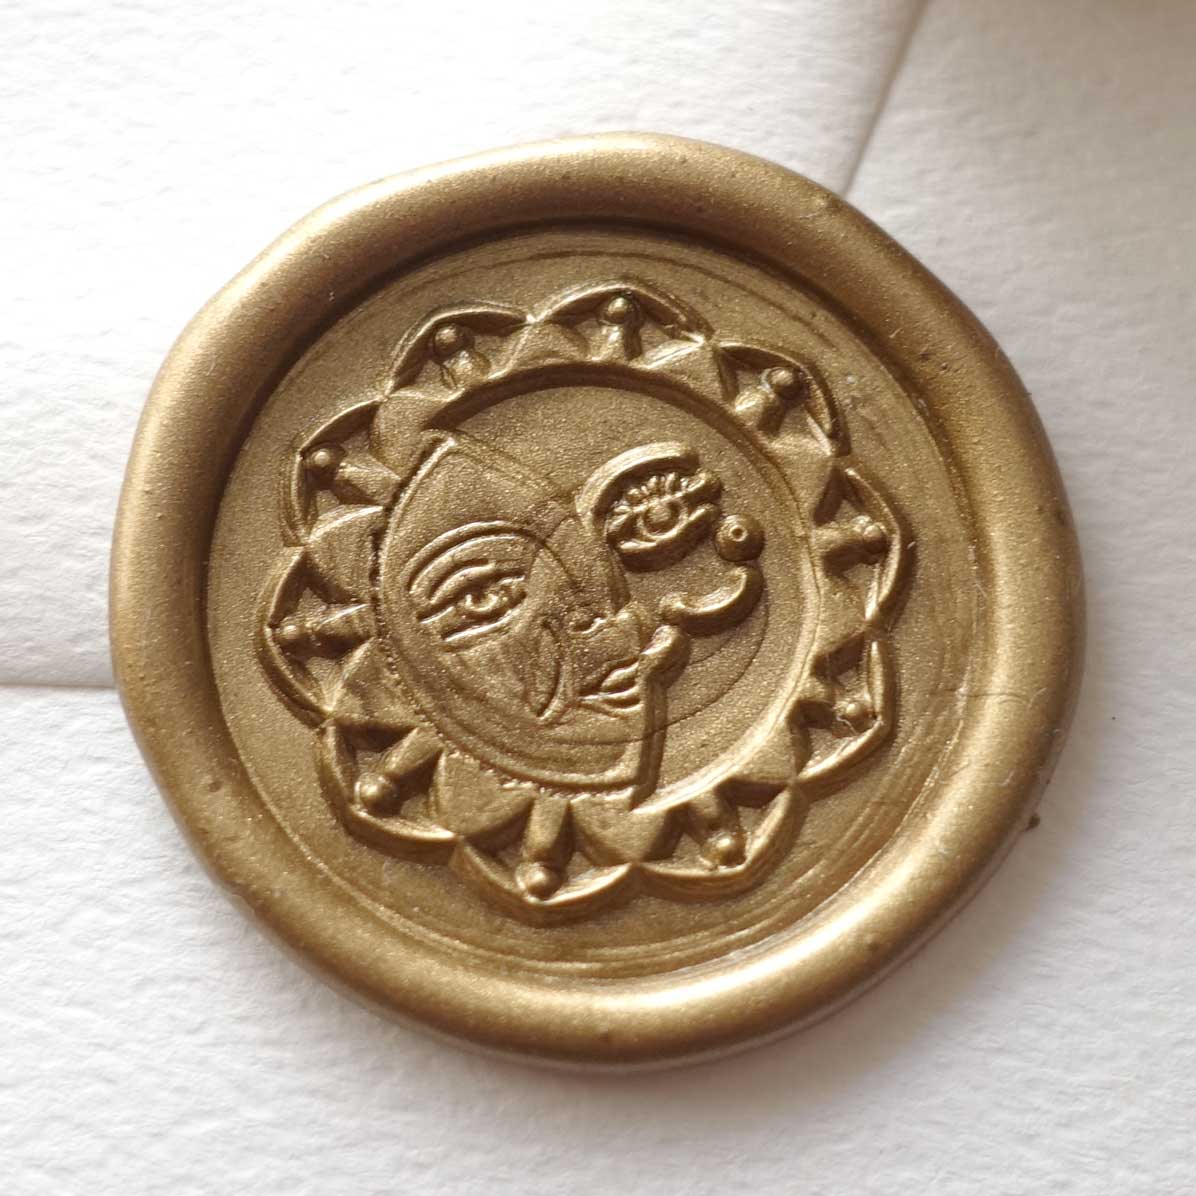 Sun and moon celestial wax sealing stamp Australia with bronze gold wax seal